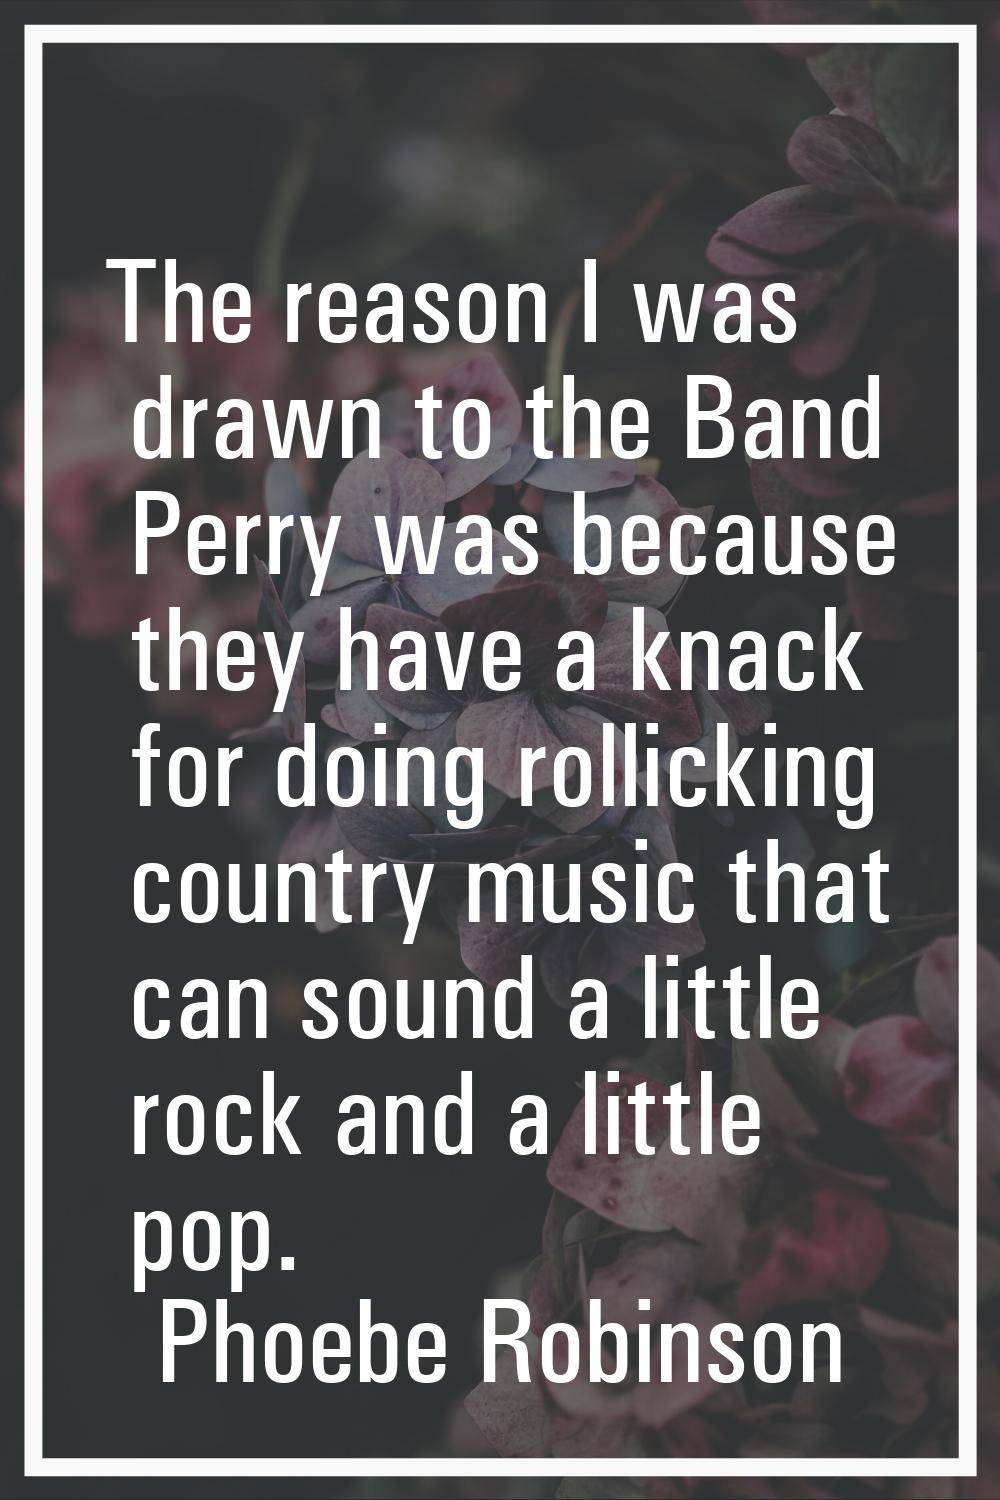 The reason I was drawn to the Band Perry was because they have a knack for doing rollicking country